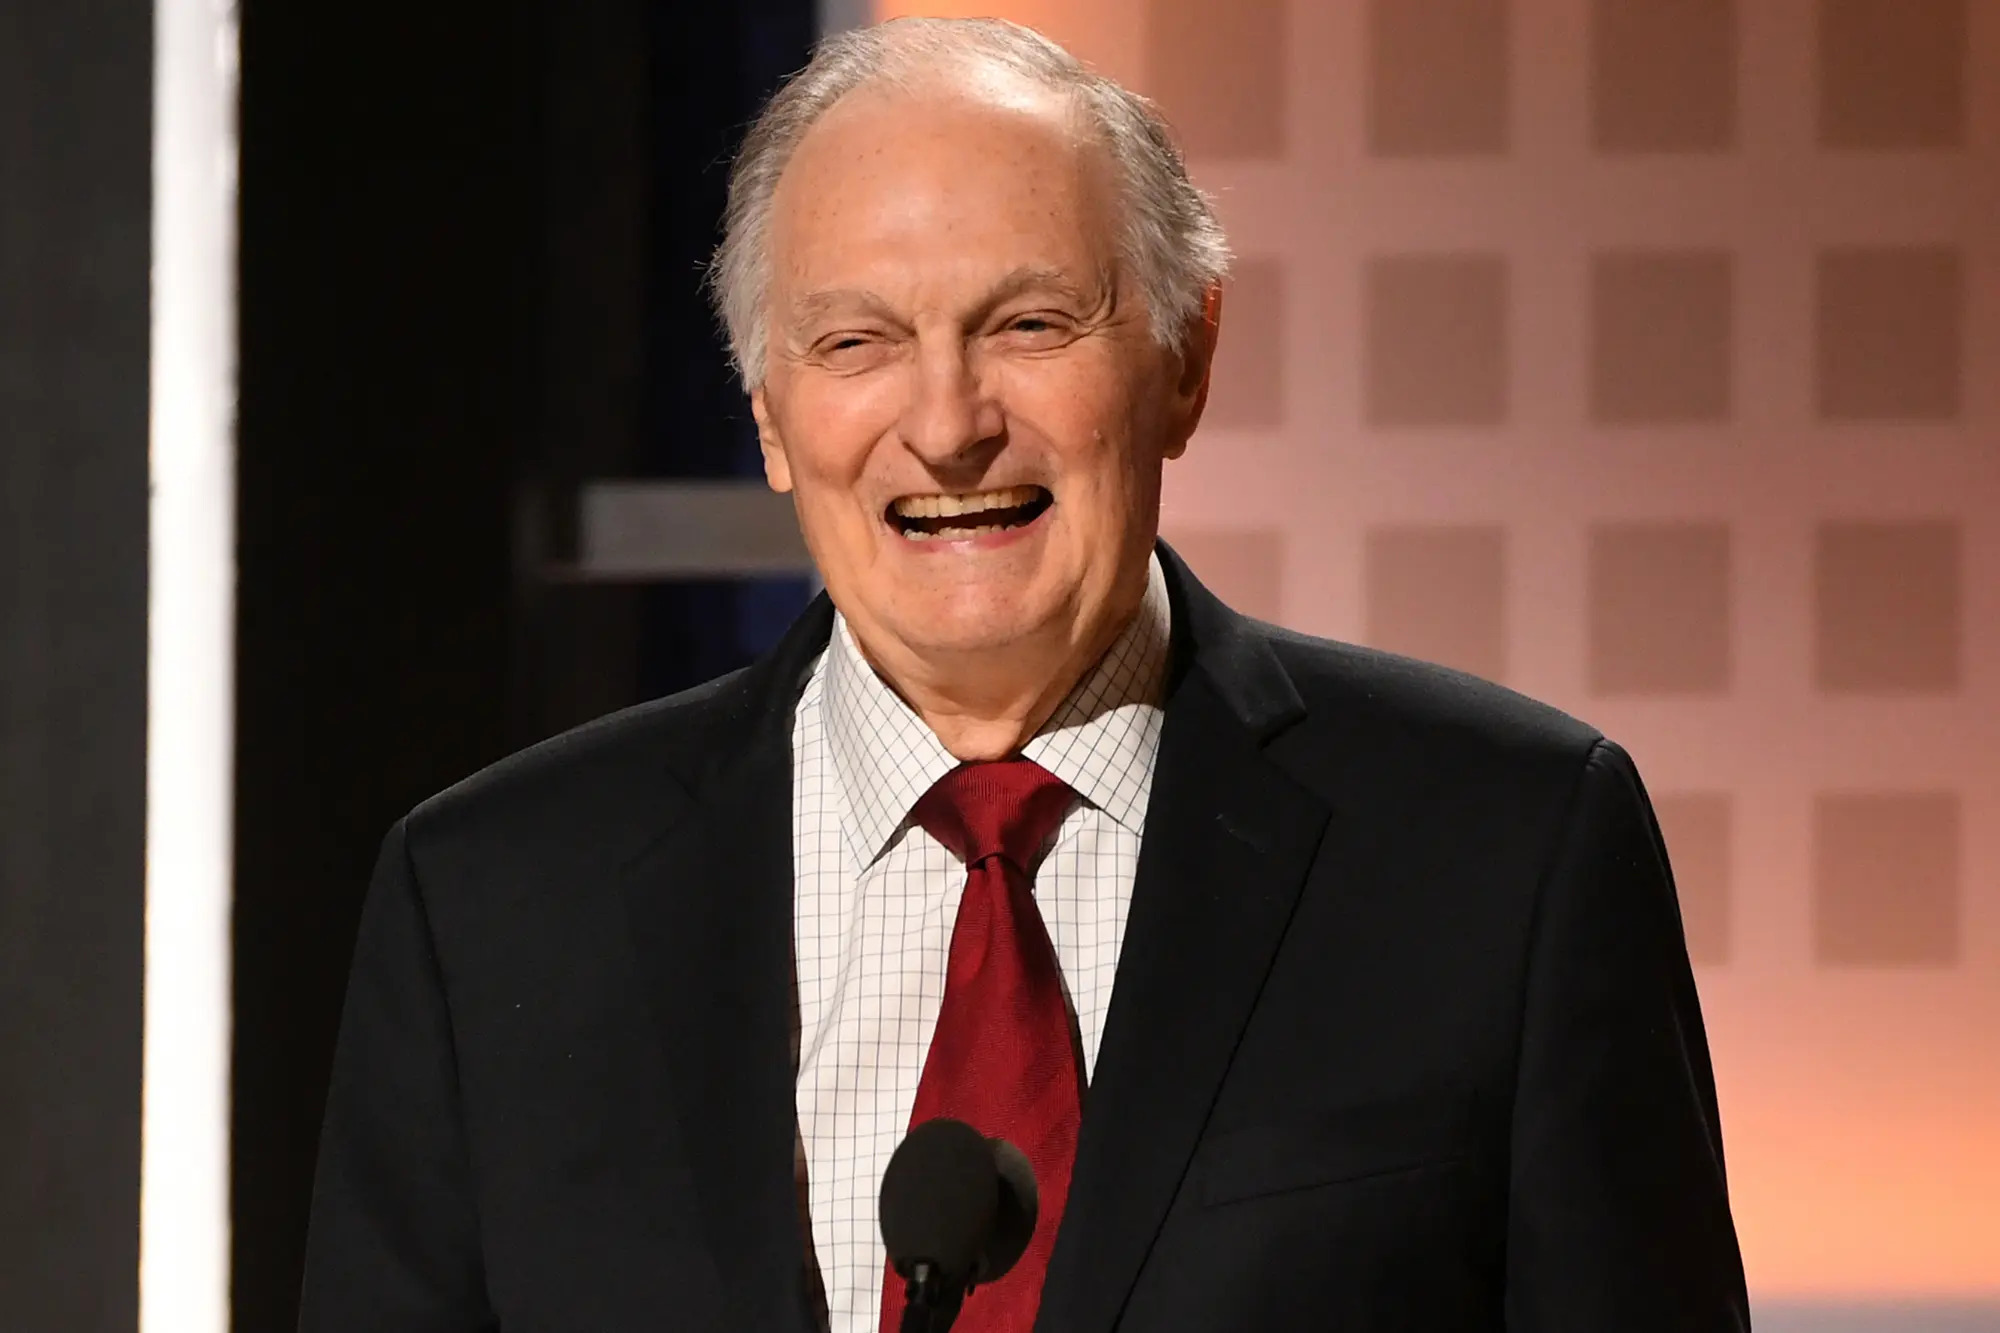 Alan Alda, Biography, TV Shows, Movies, & Facts